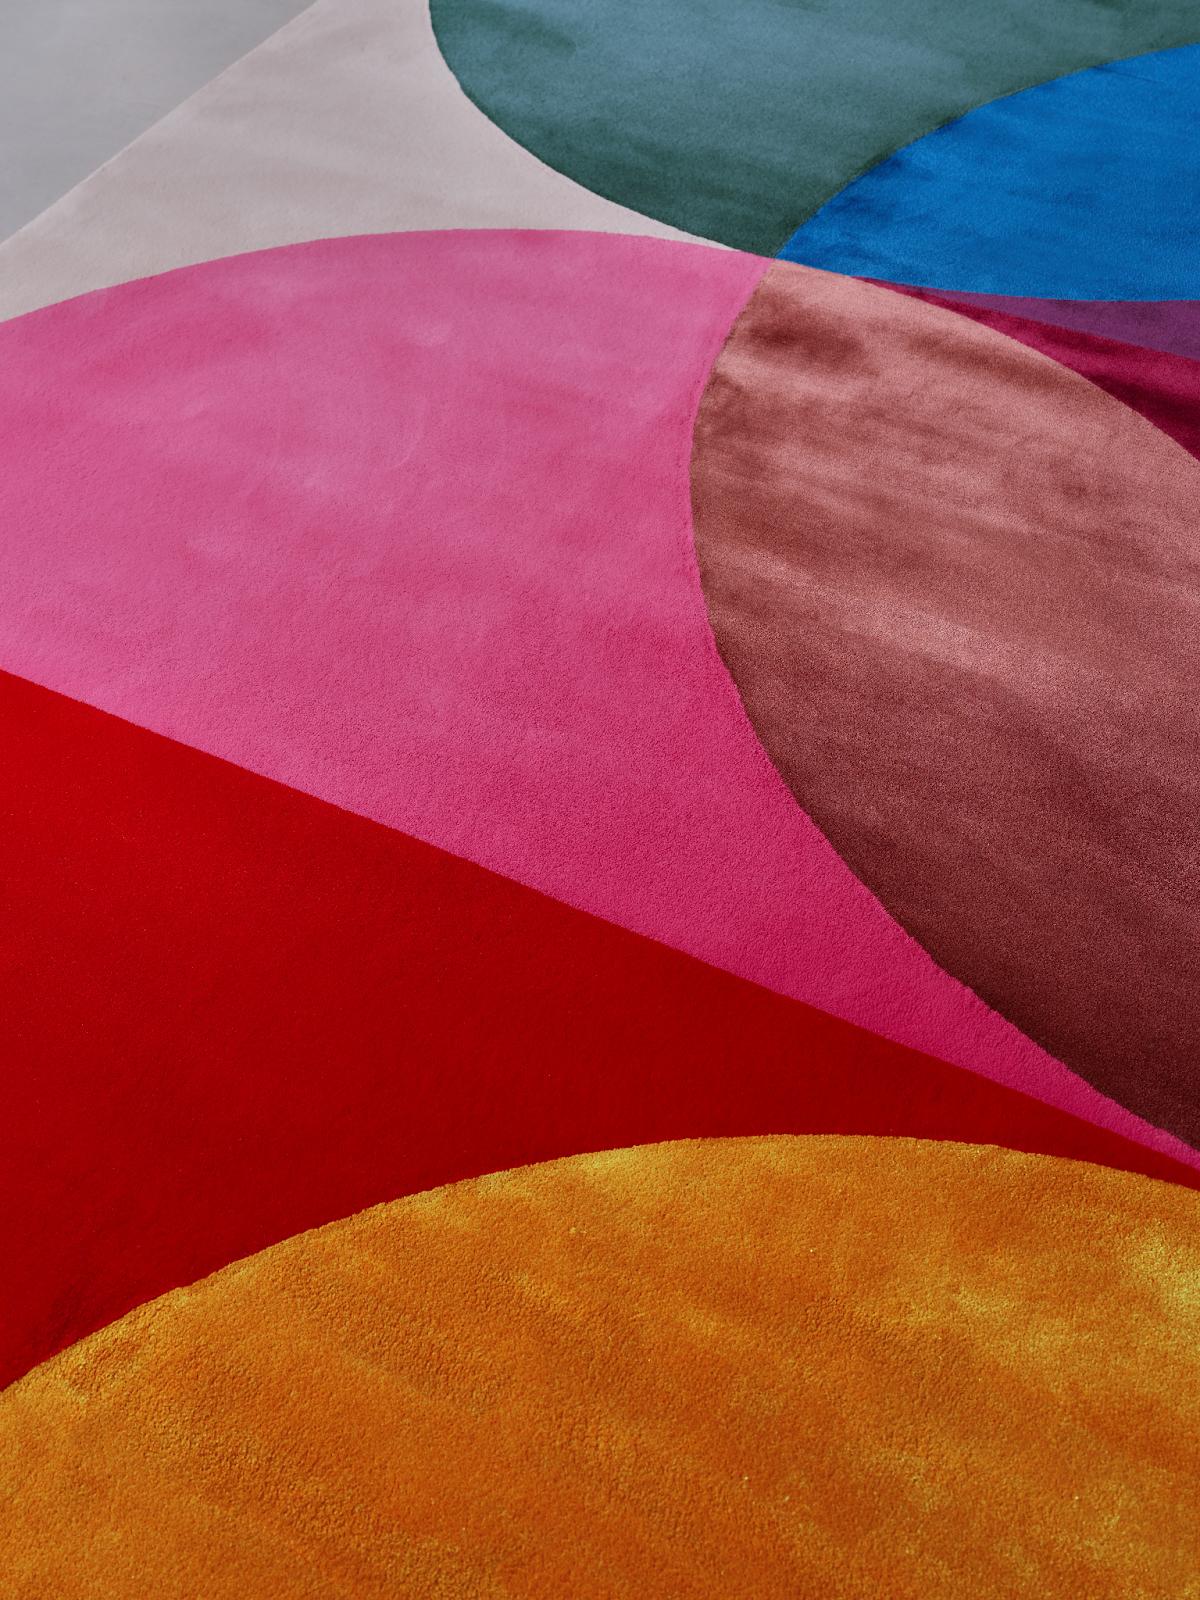 The Espressionismo Floreale rug collection is woven from a luxurious blend of New Zealand wool and vegan silk. The rugs are designed in Los Angeles and made in Portugal using the handtufting technique by Laura Niubó.

Espressionismo Floreale is